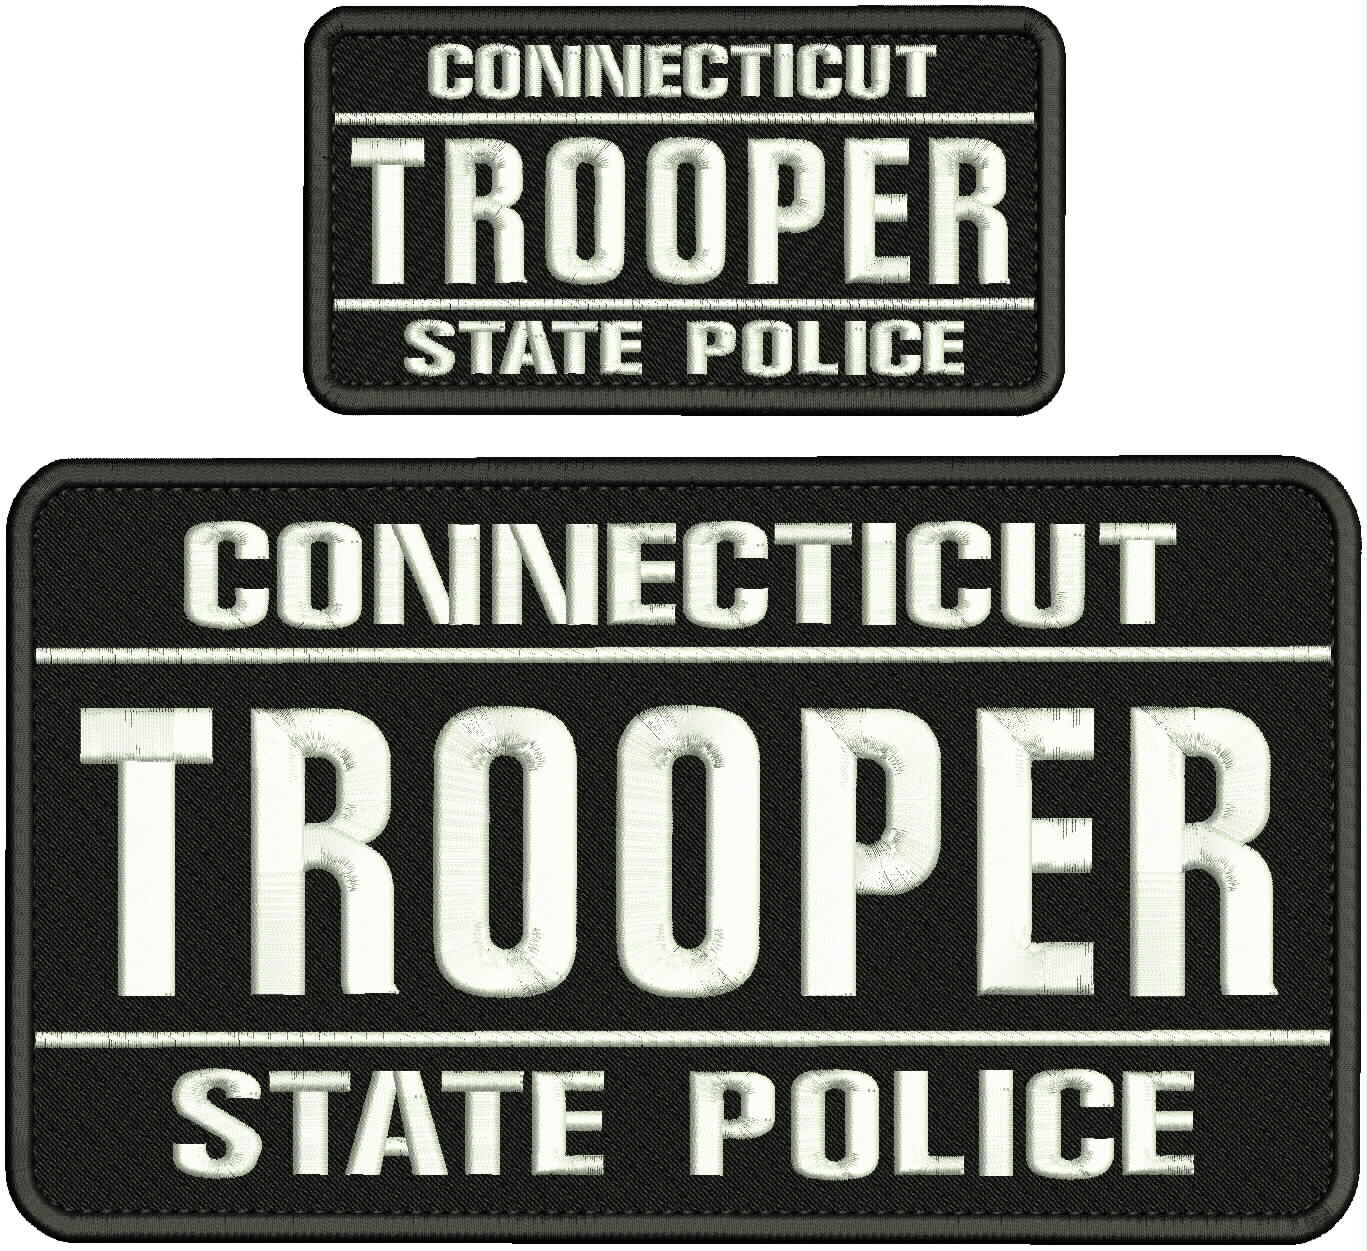 CONNECTICUT TROOPER STATE POLICE EMB PATCH 6X11&3X6 HOOK ON BACK BLK/white